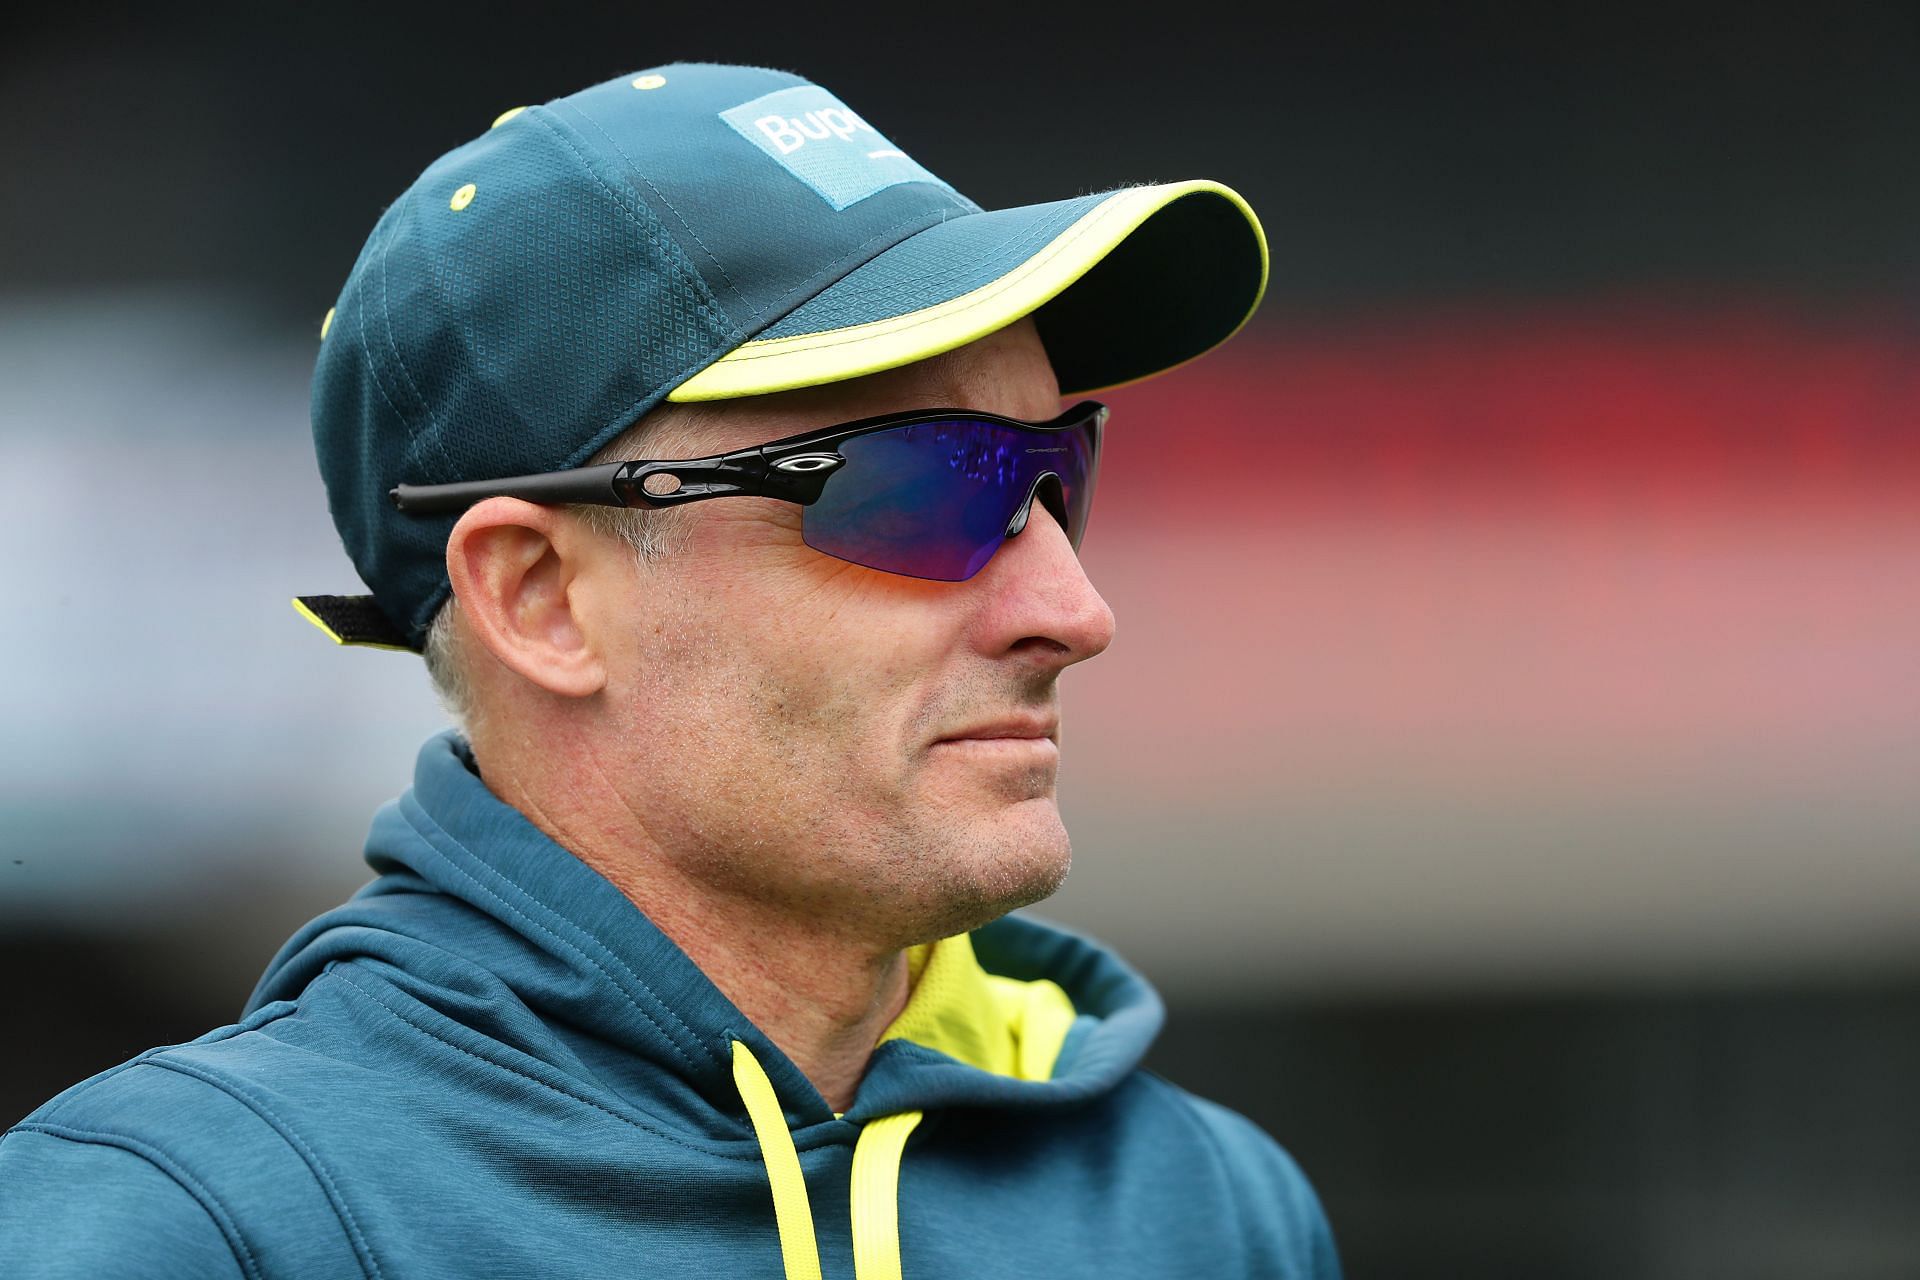 Michael Hussey has been coaching a lot in recent times